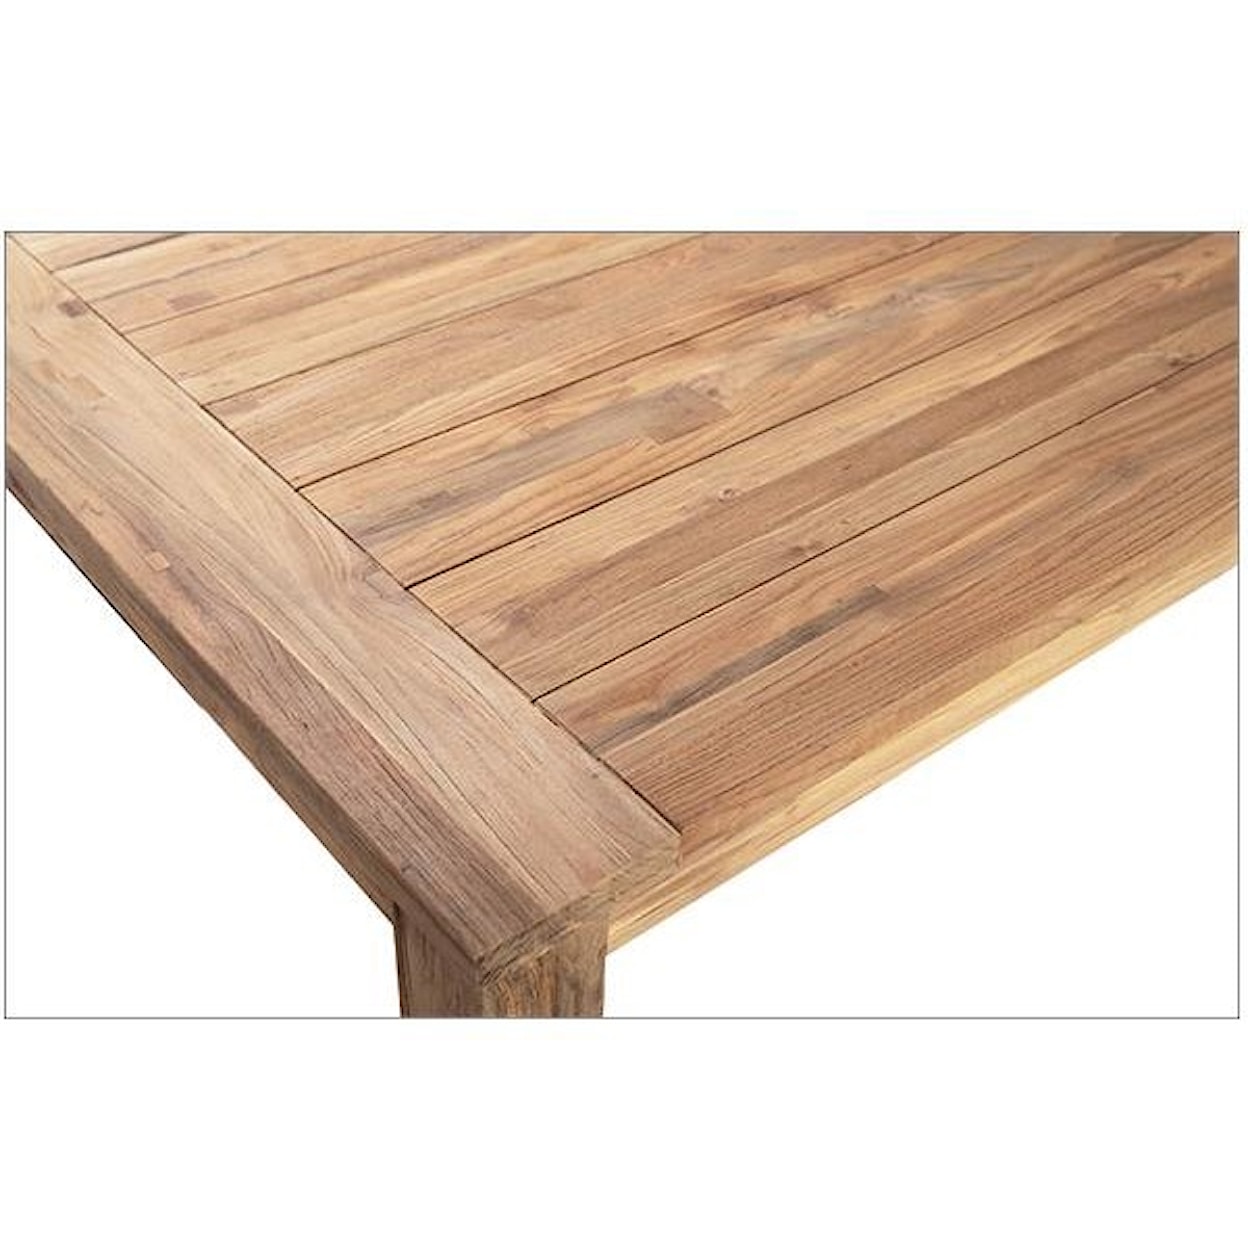 Dovetail Furniture Outdoor Hogan Large Dining Table